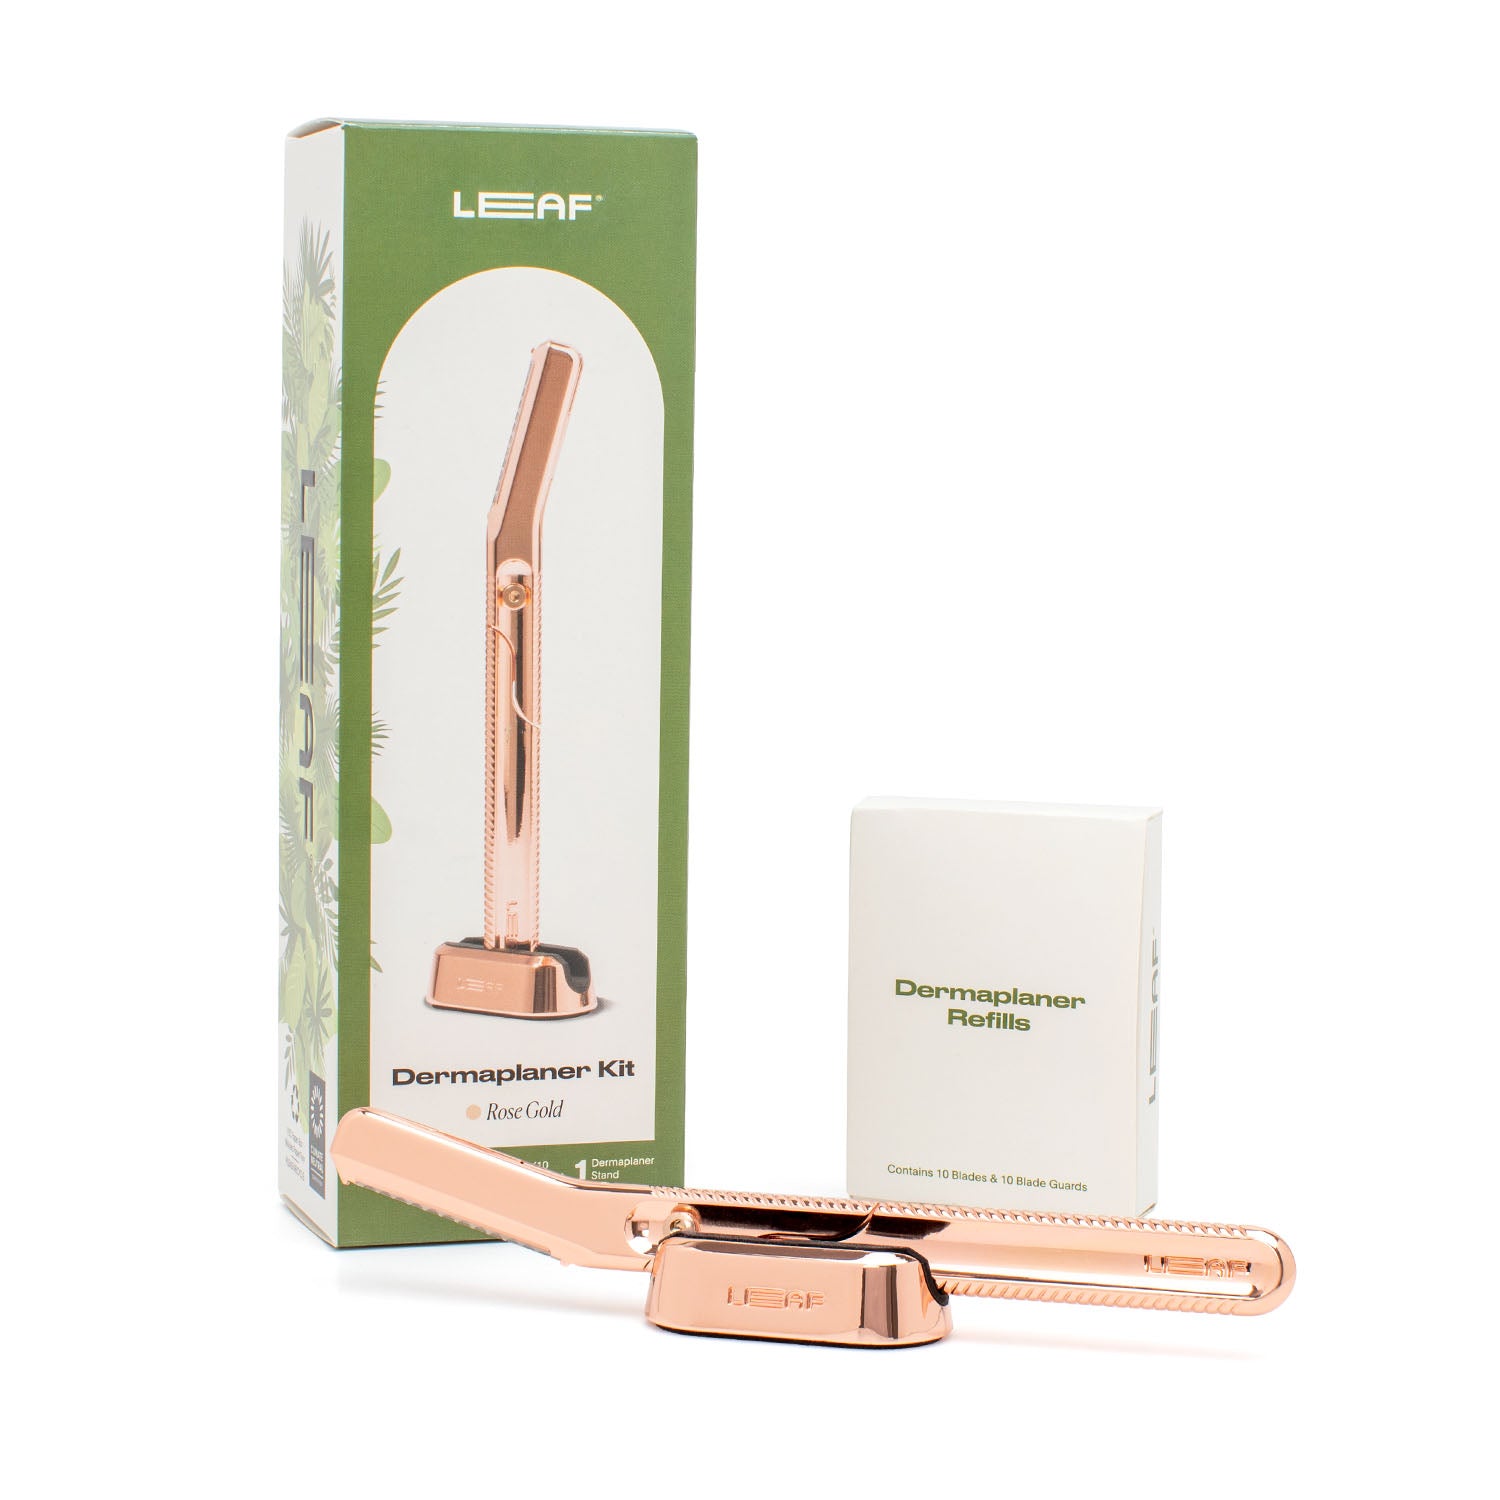 Leaf Dermaplaner Kit, with box, tool, stand and refill pack in rose gold.